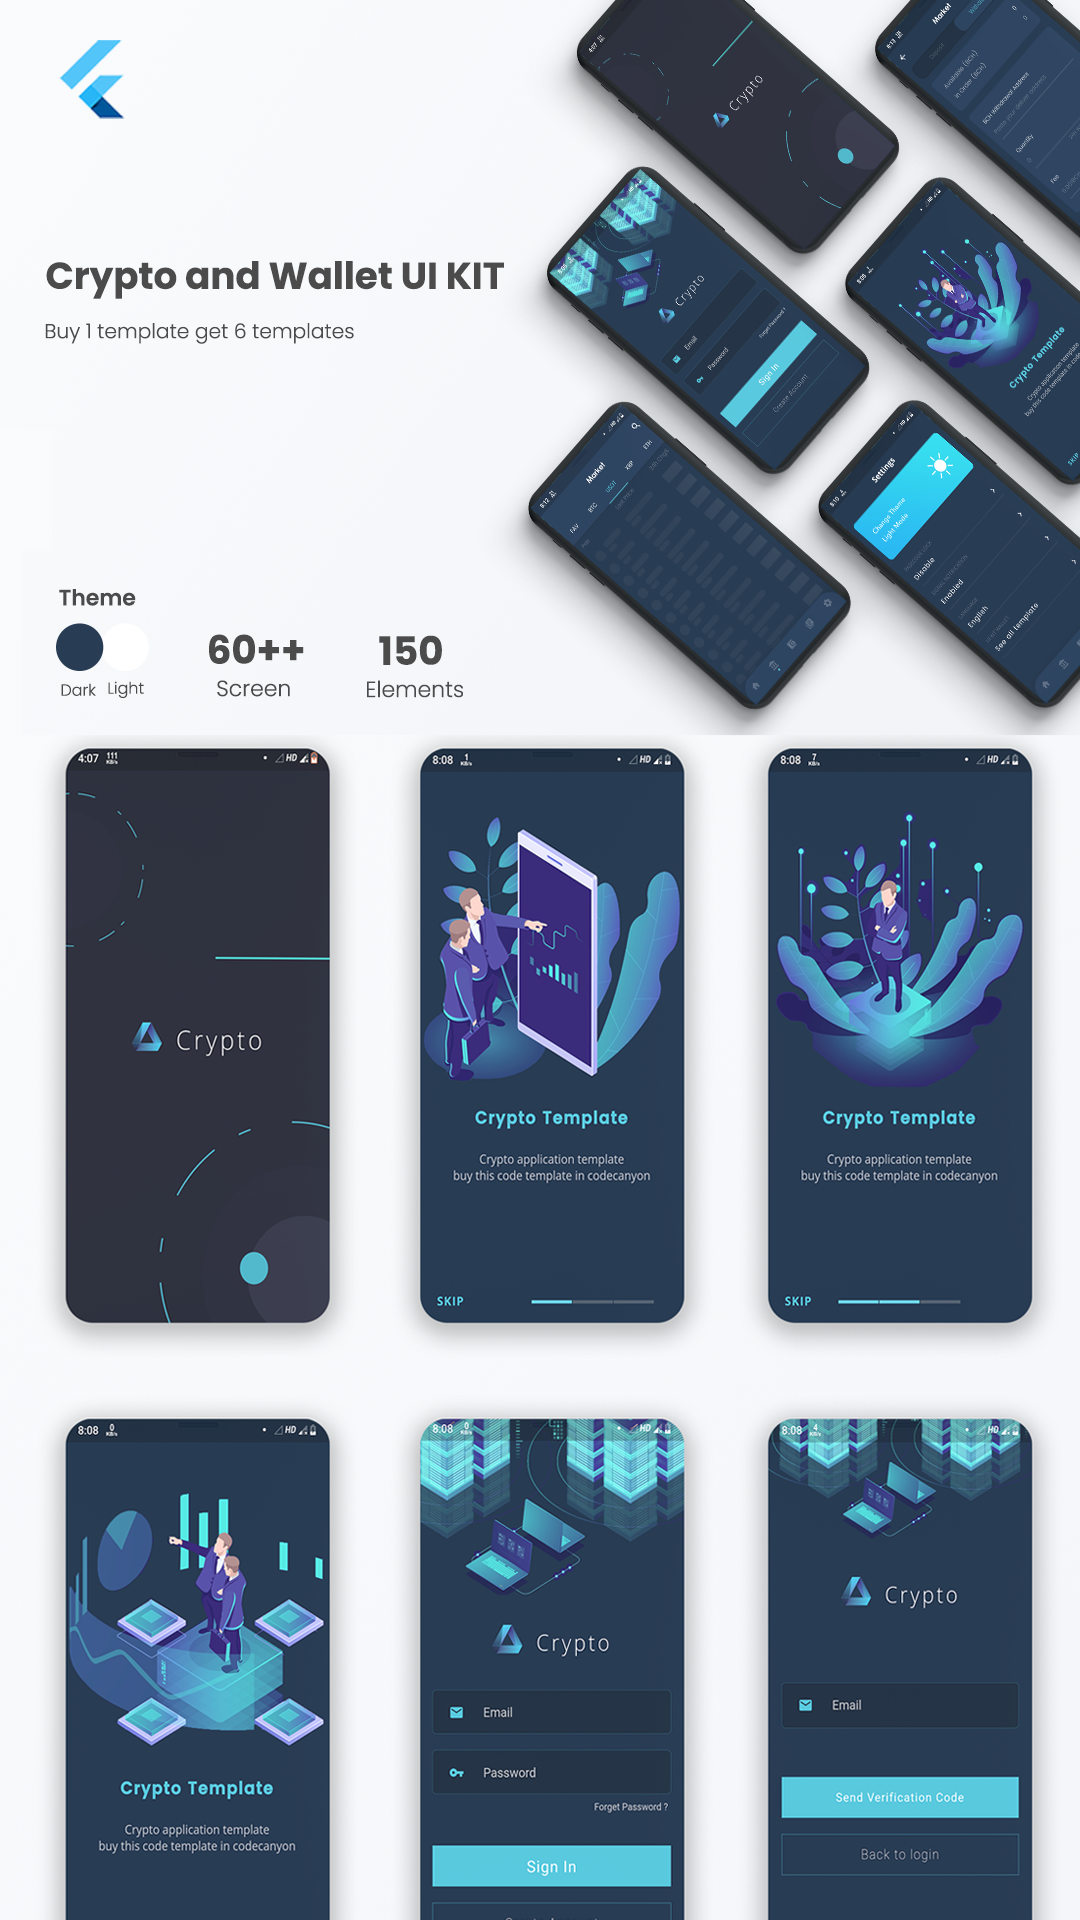 Crypto and Wallet UI KIT Template in flutter | It's All ...